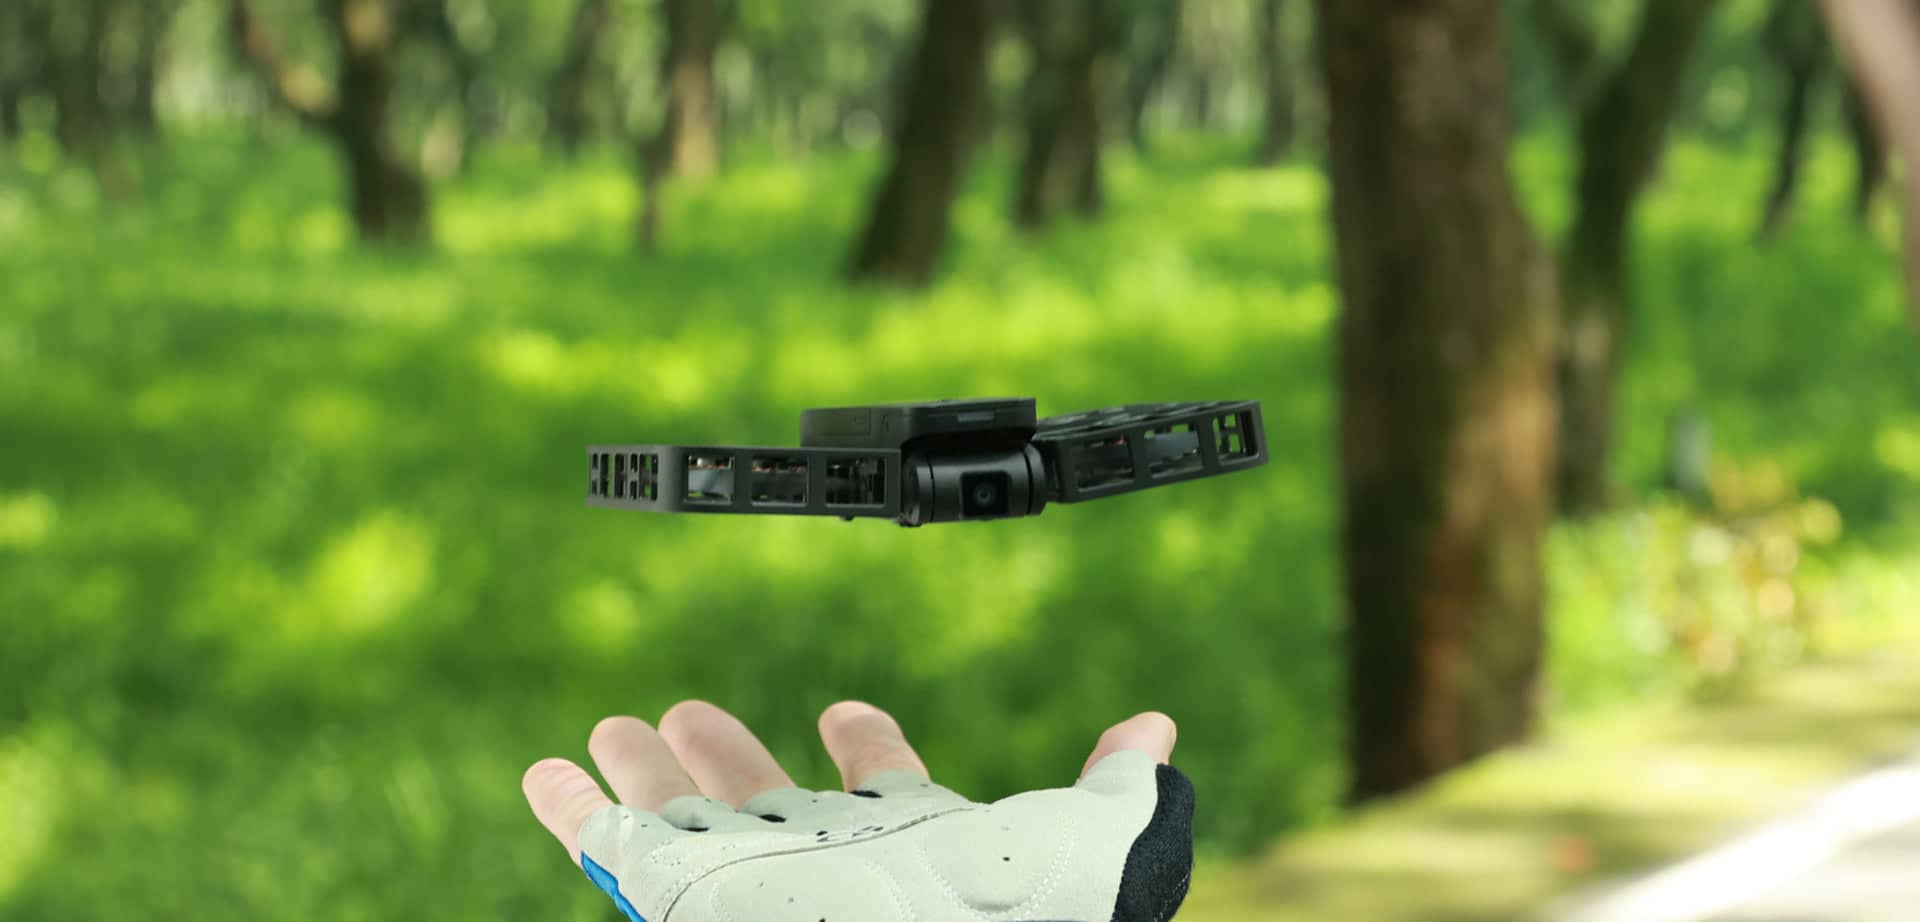 HOVERAir X1 Pocket-Sized | Self-Flying Camera | 2.7K video/1080p HDR | Triple Stabilization 84